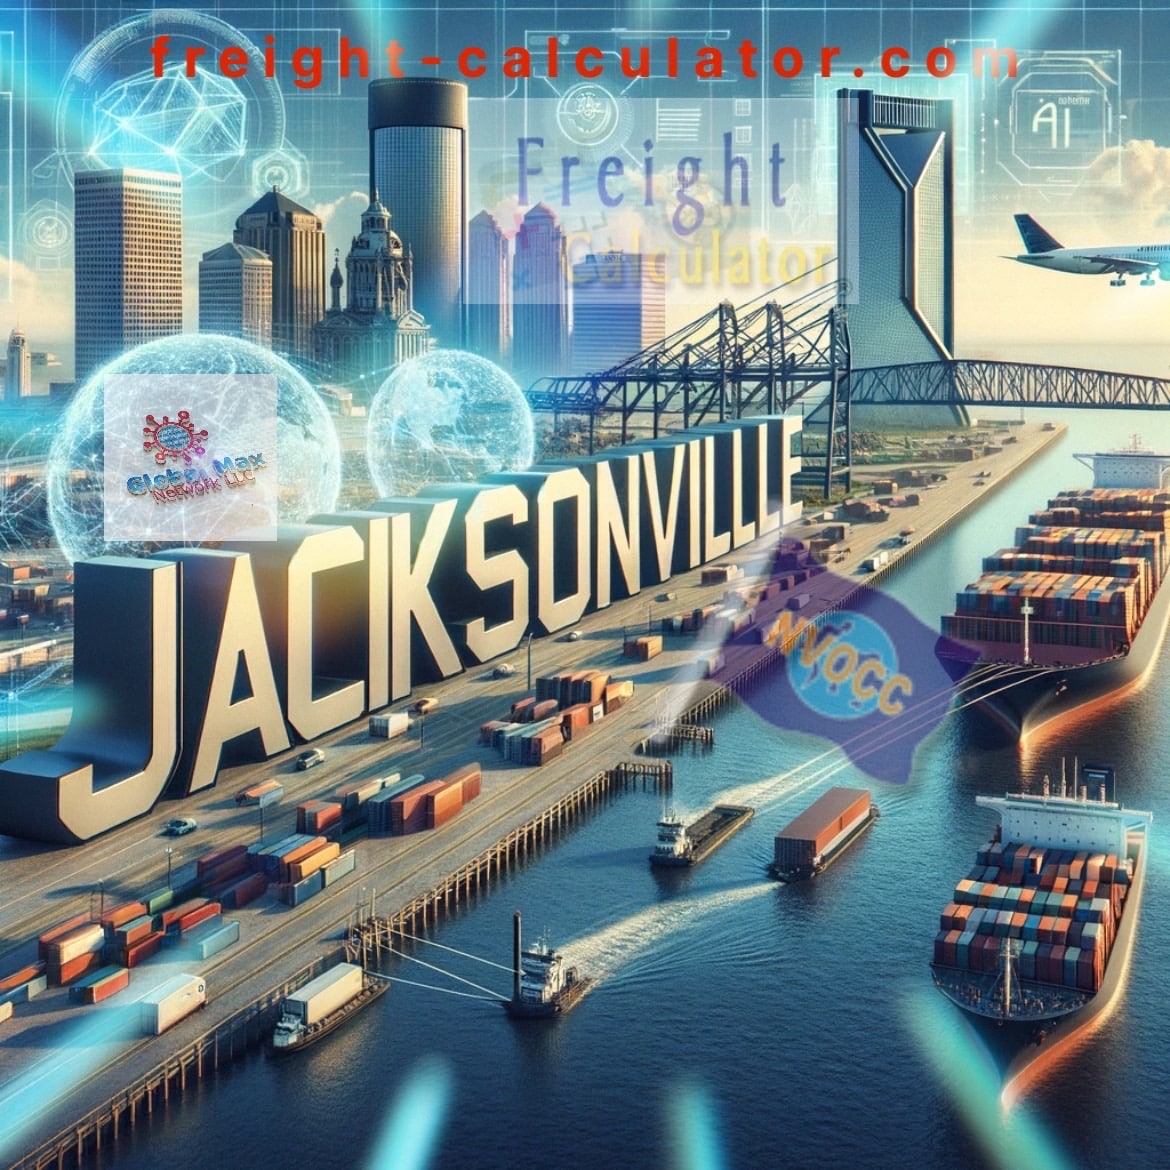 Container Shipping From JACKSONVILLE